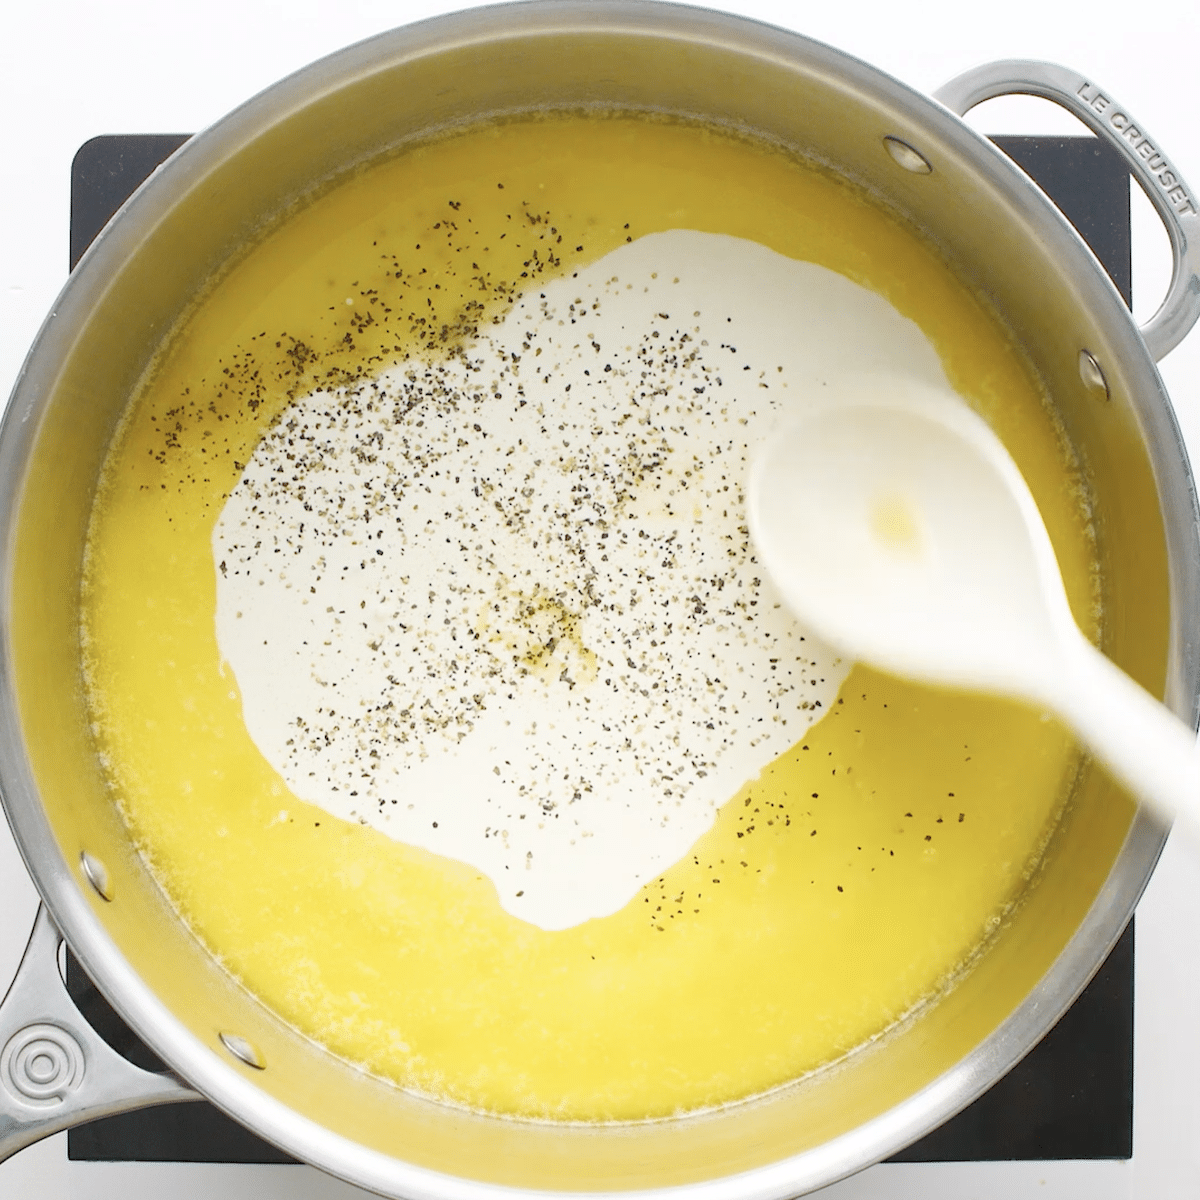 Garlic, heavy cream, butter, and pepper in a sauce pan with a spoon stirring